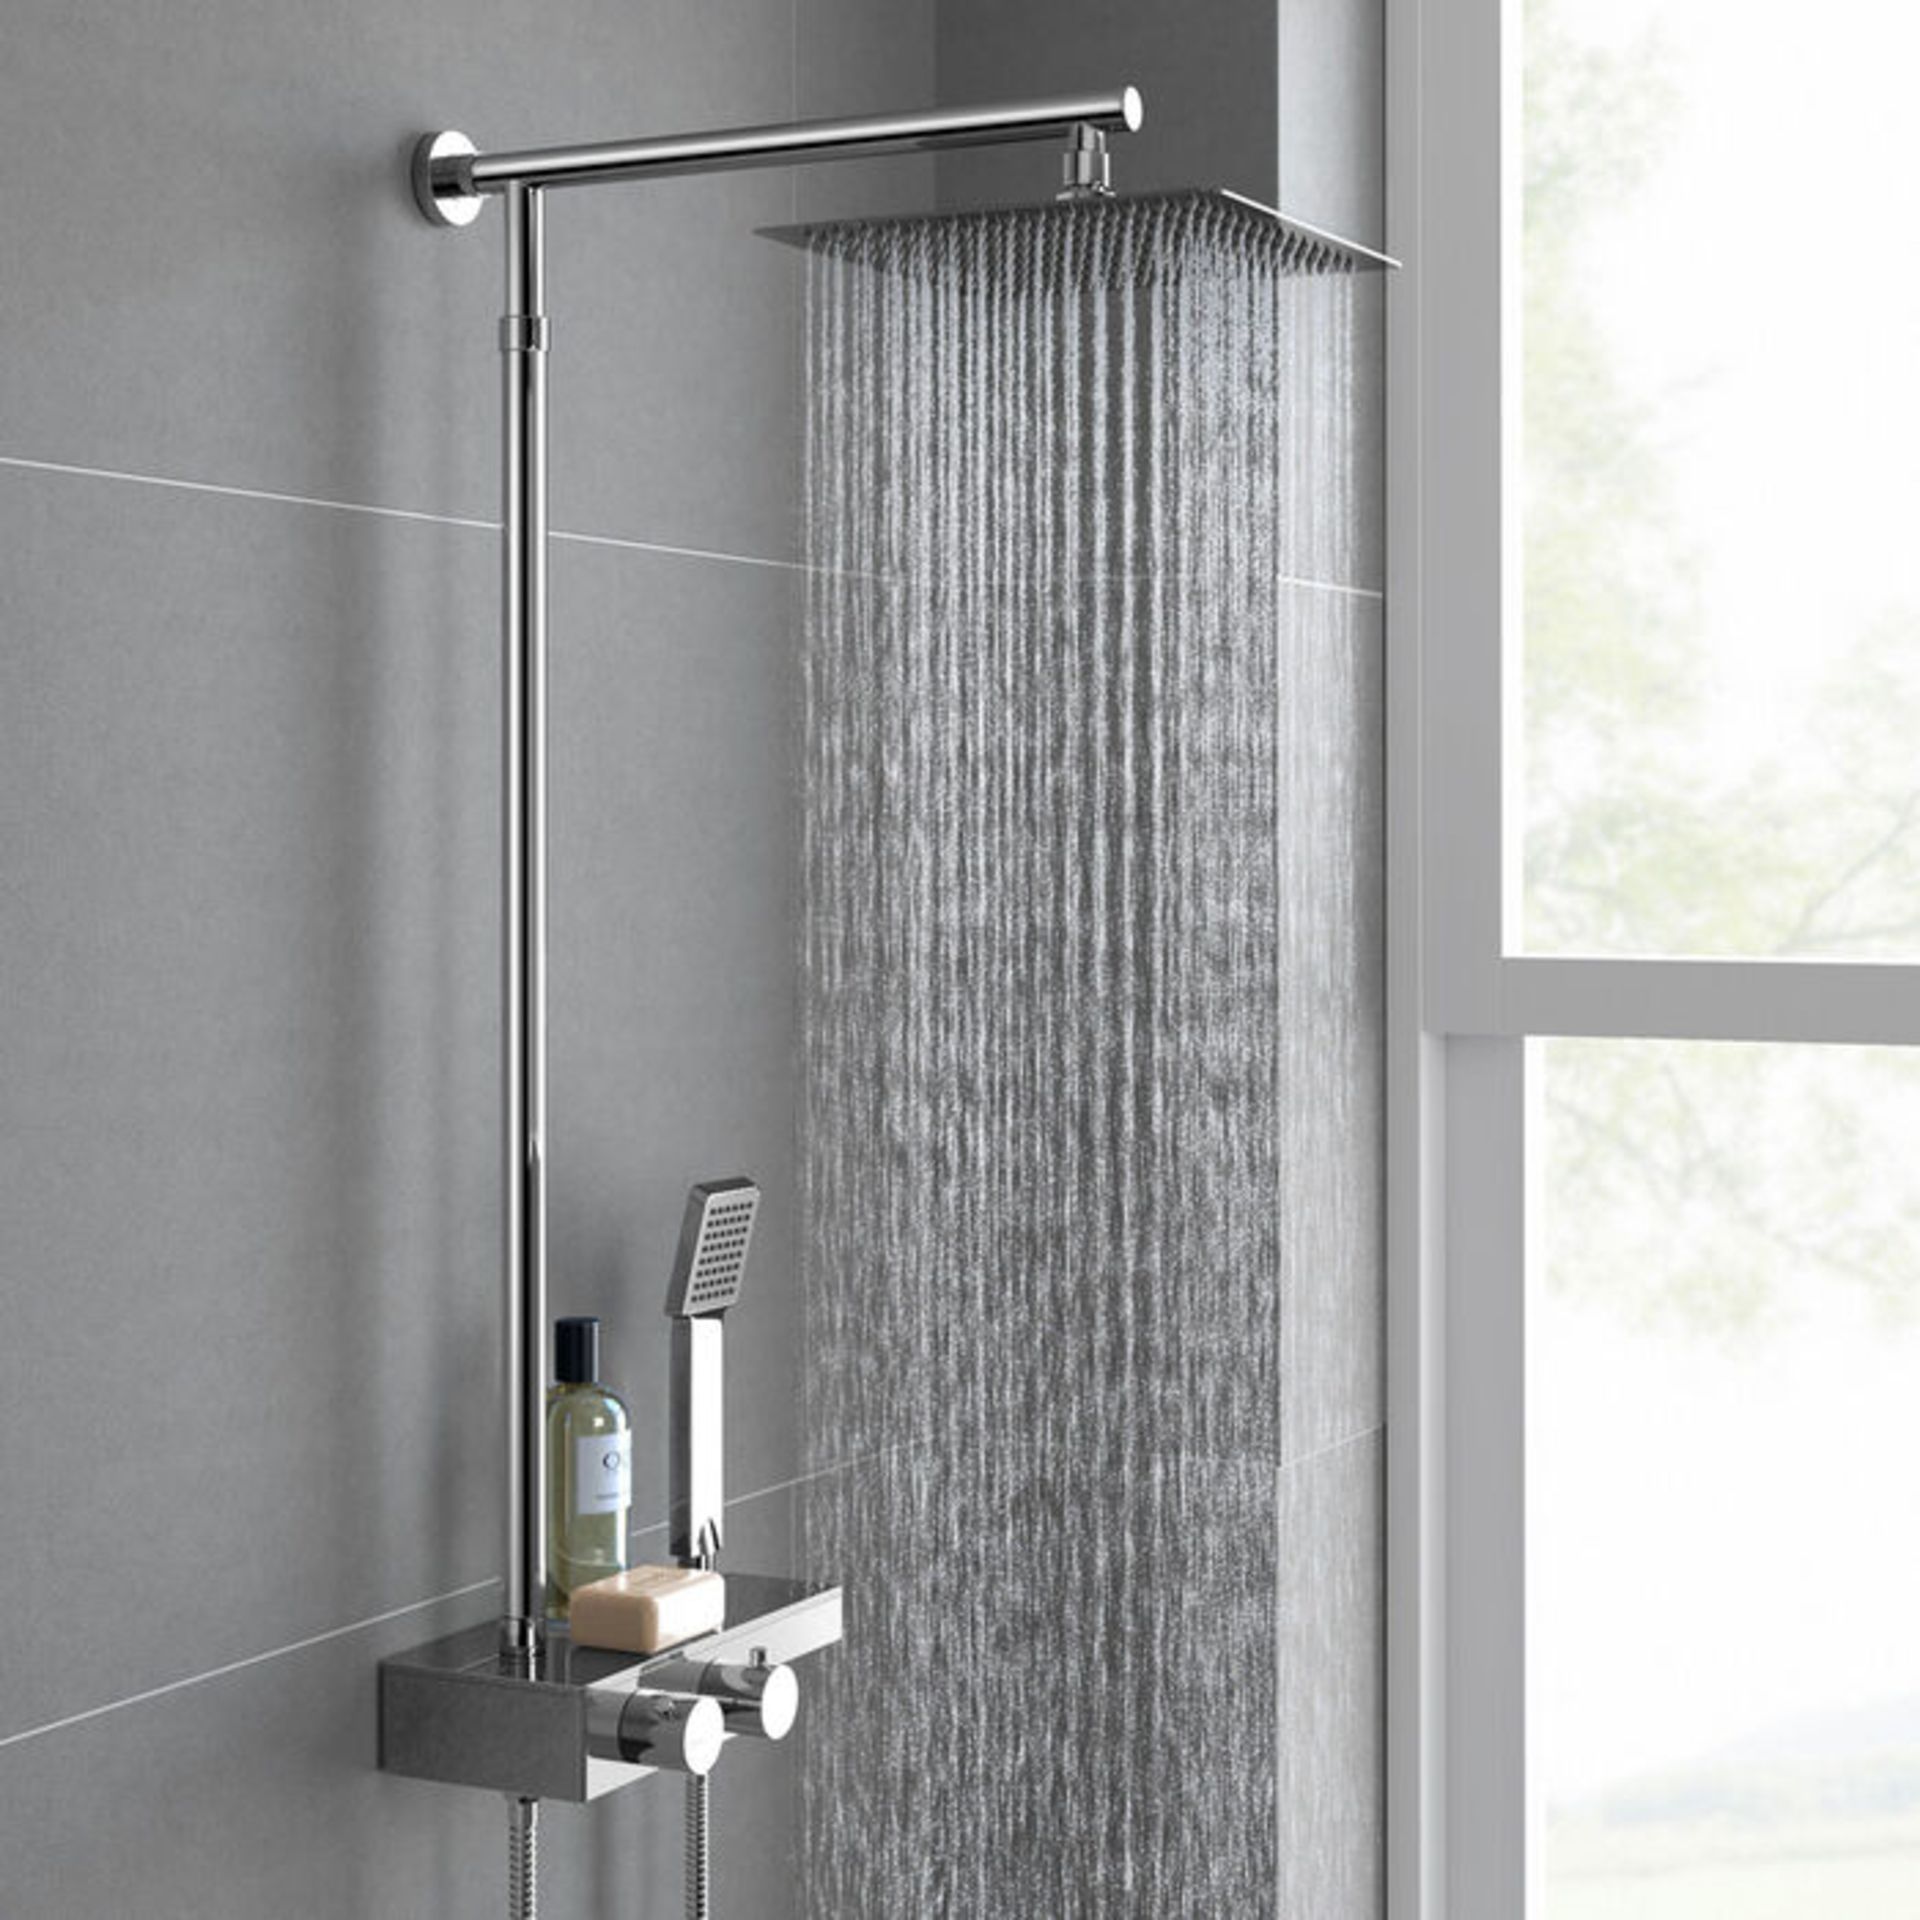 (CP140) Square Exposed Thermostatic Mixer Shower Kit With Handheld & Storage Shelf. Includes a...